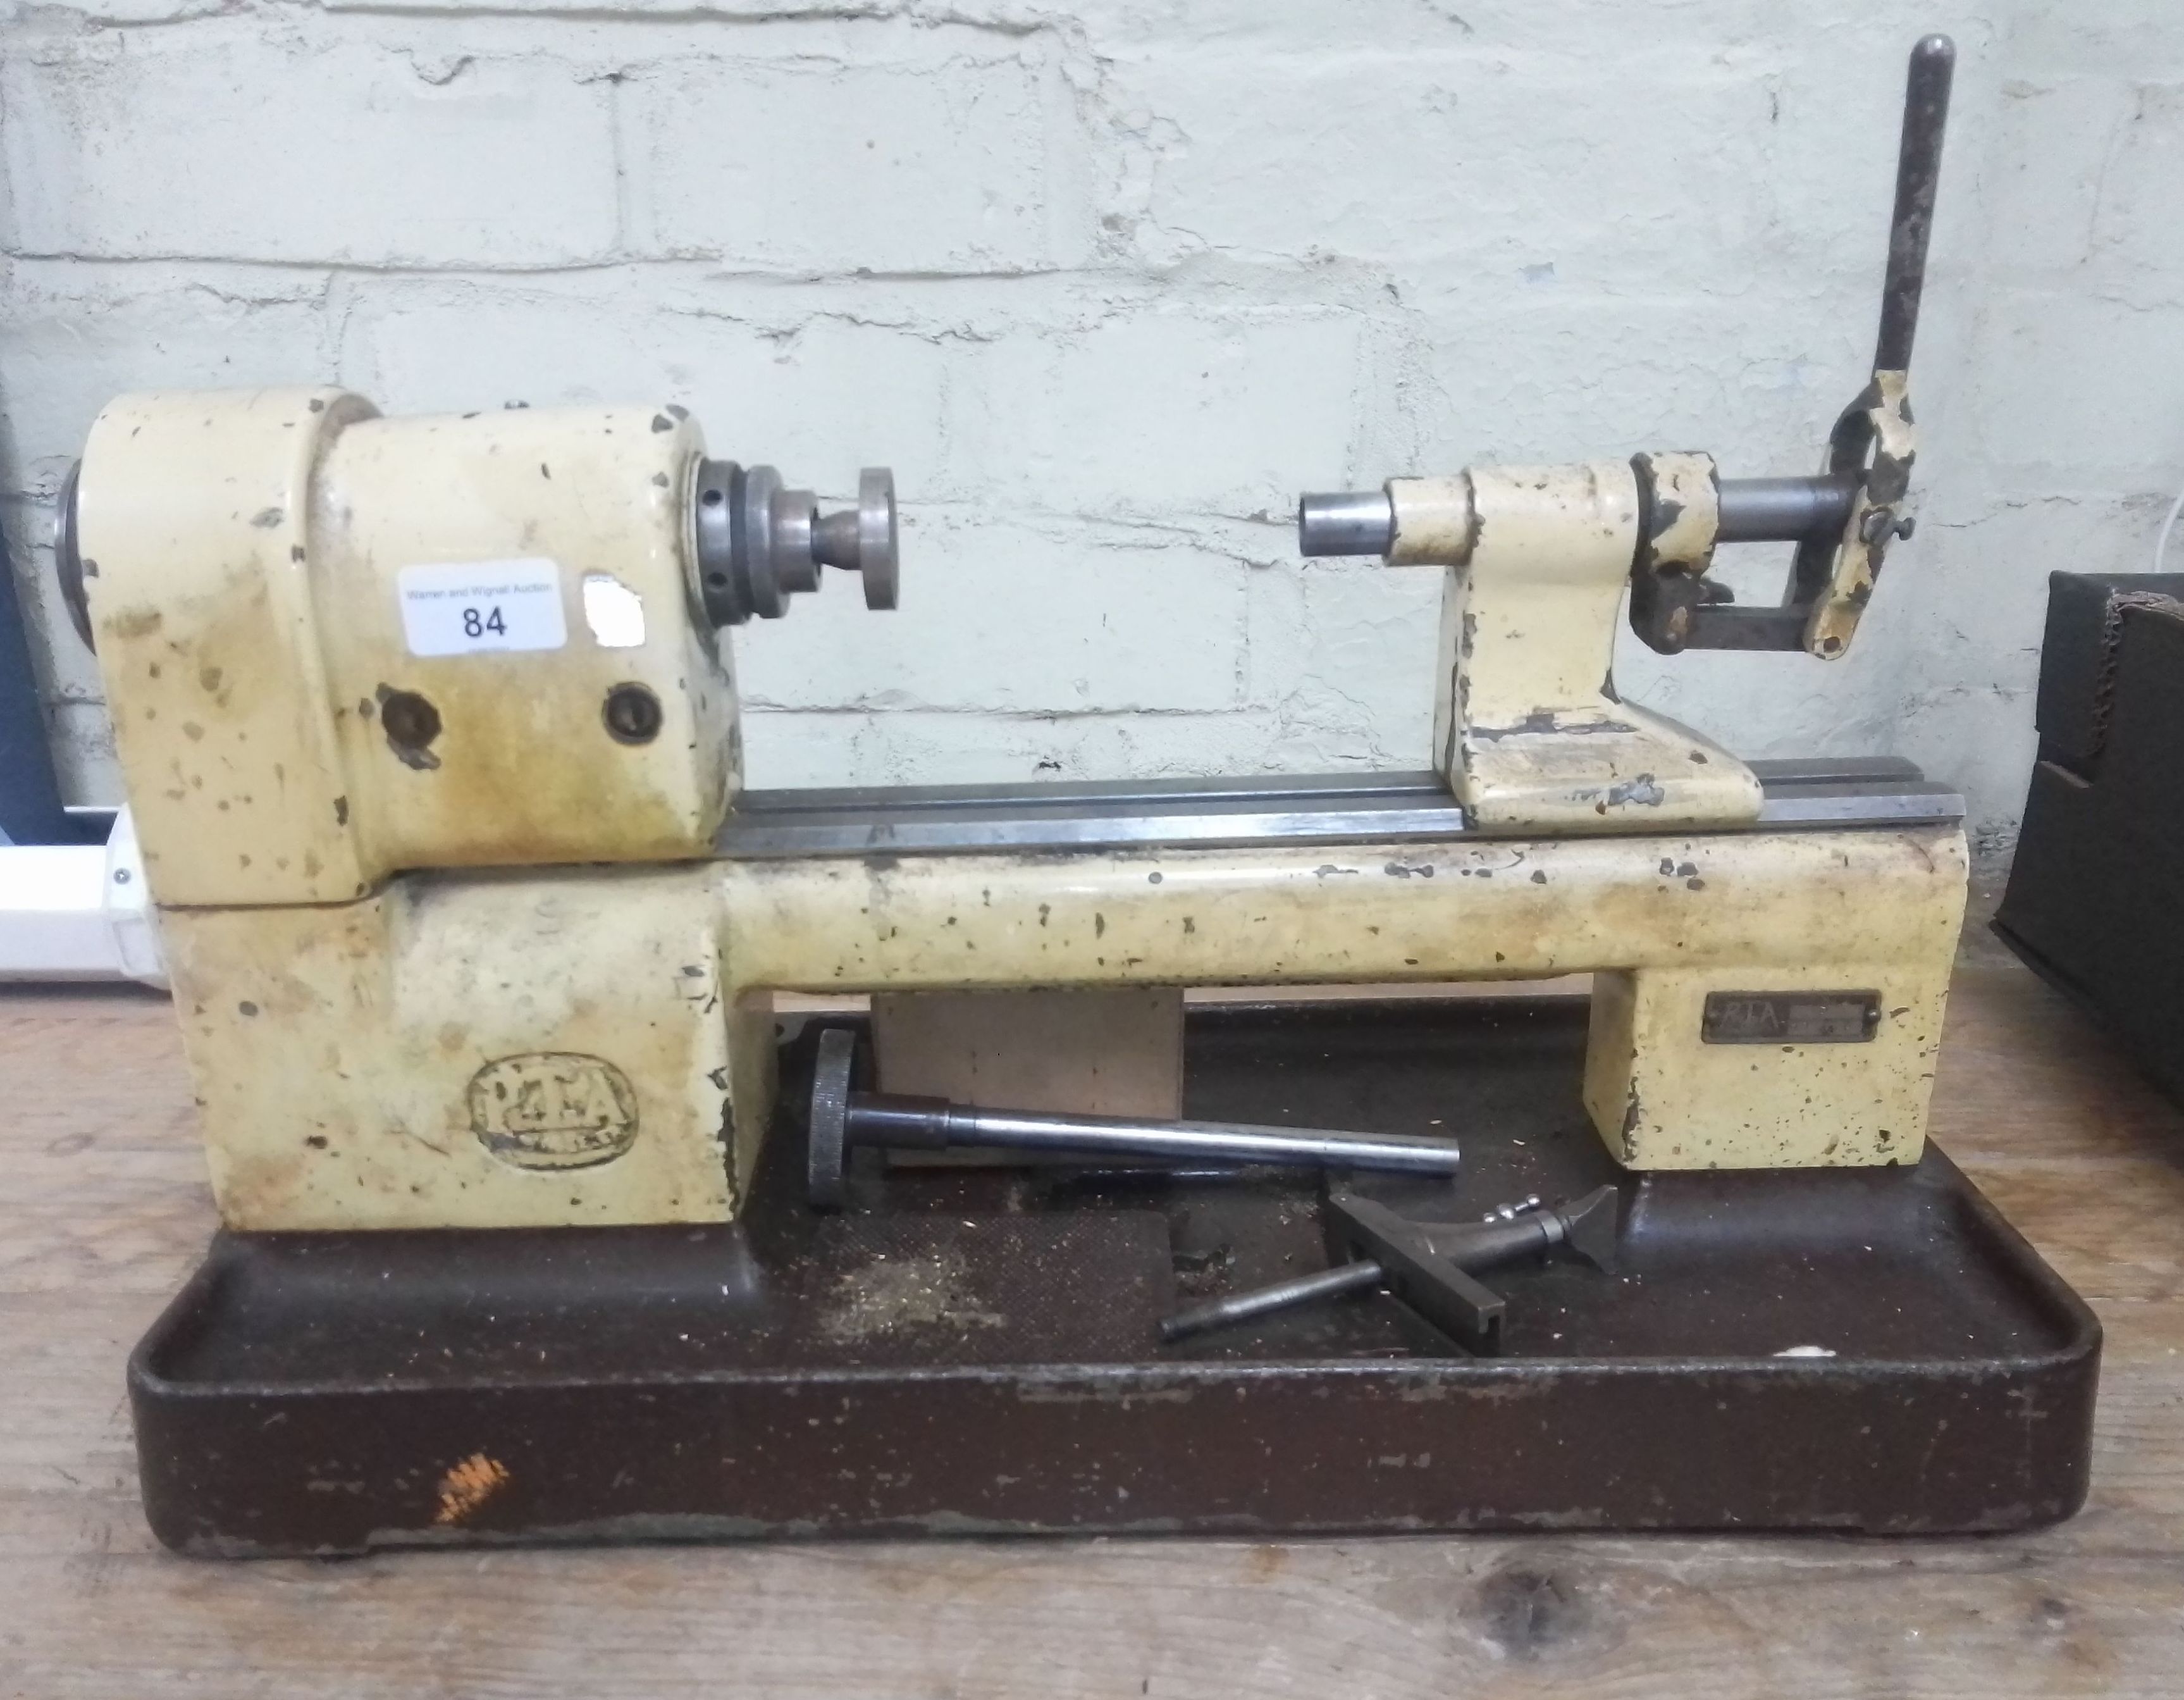 A vintage Pultra watch lathe.